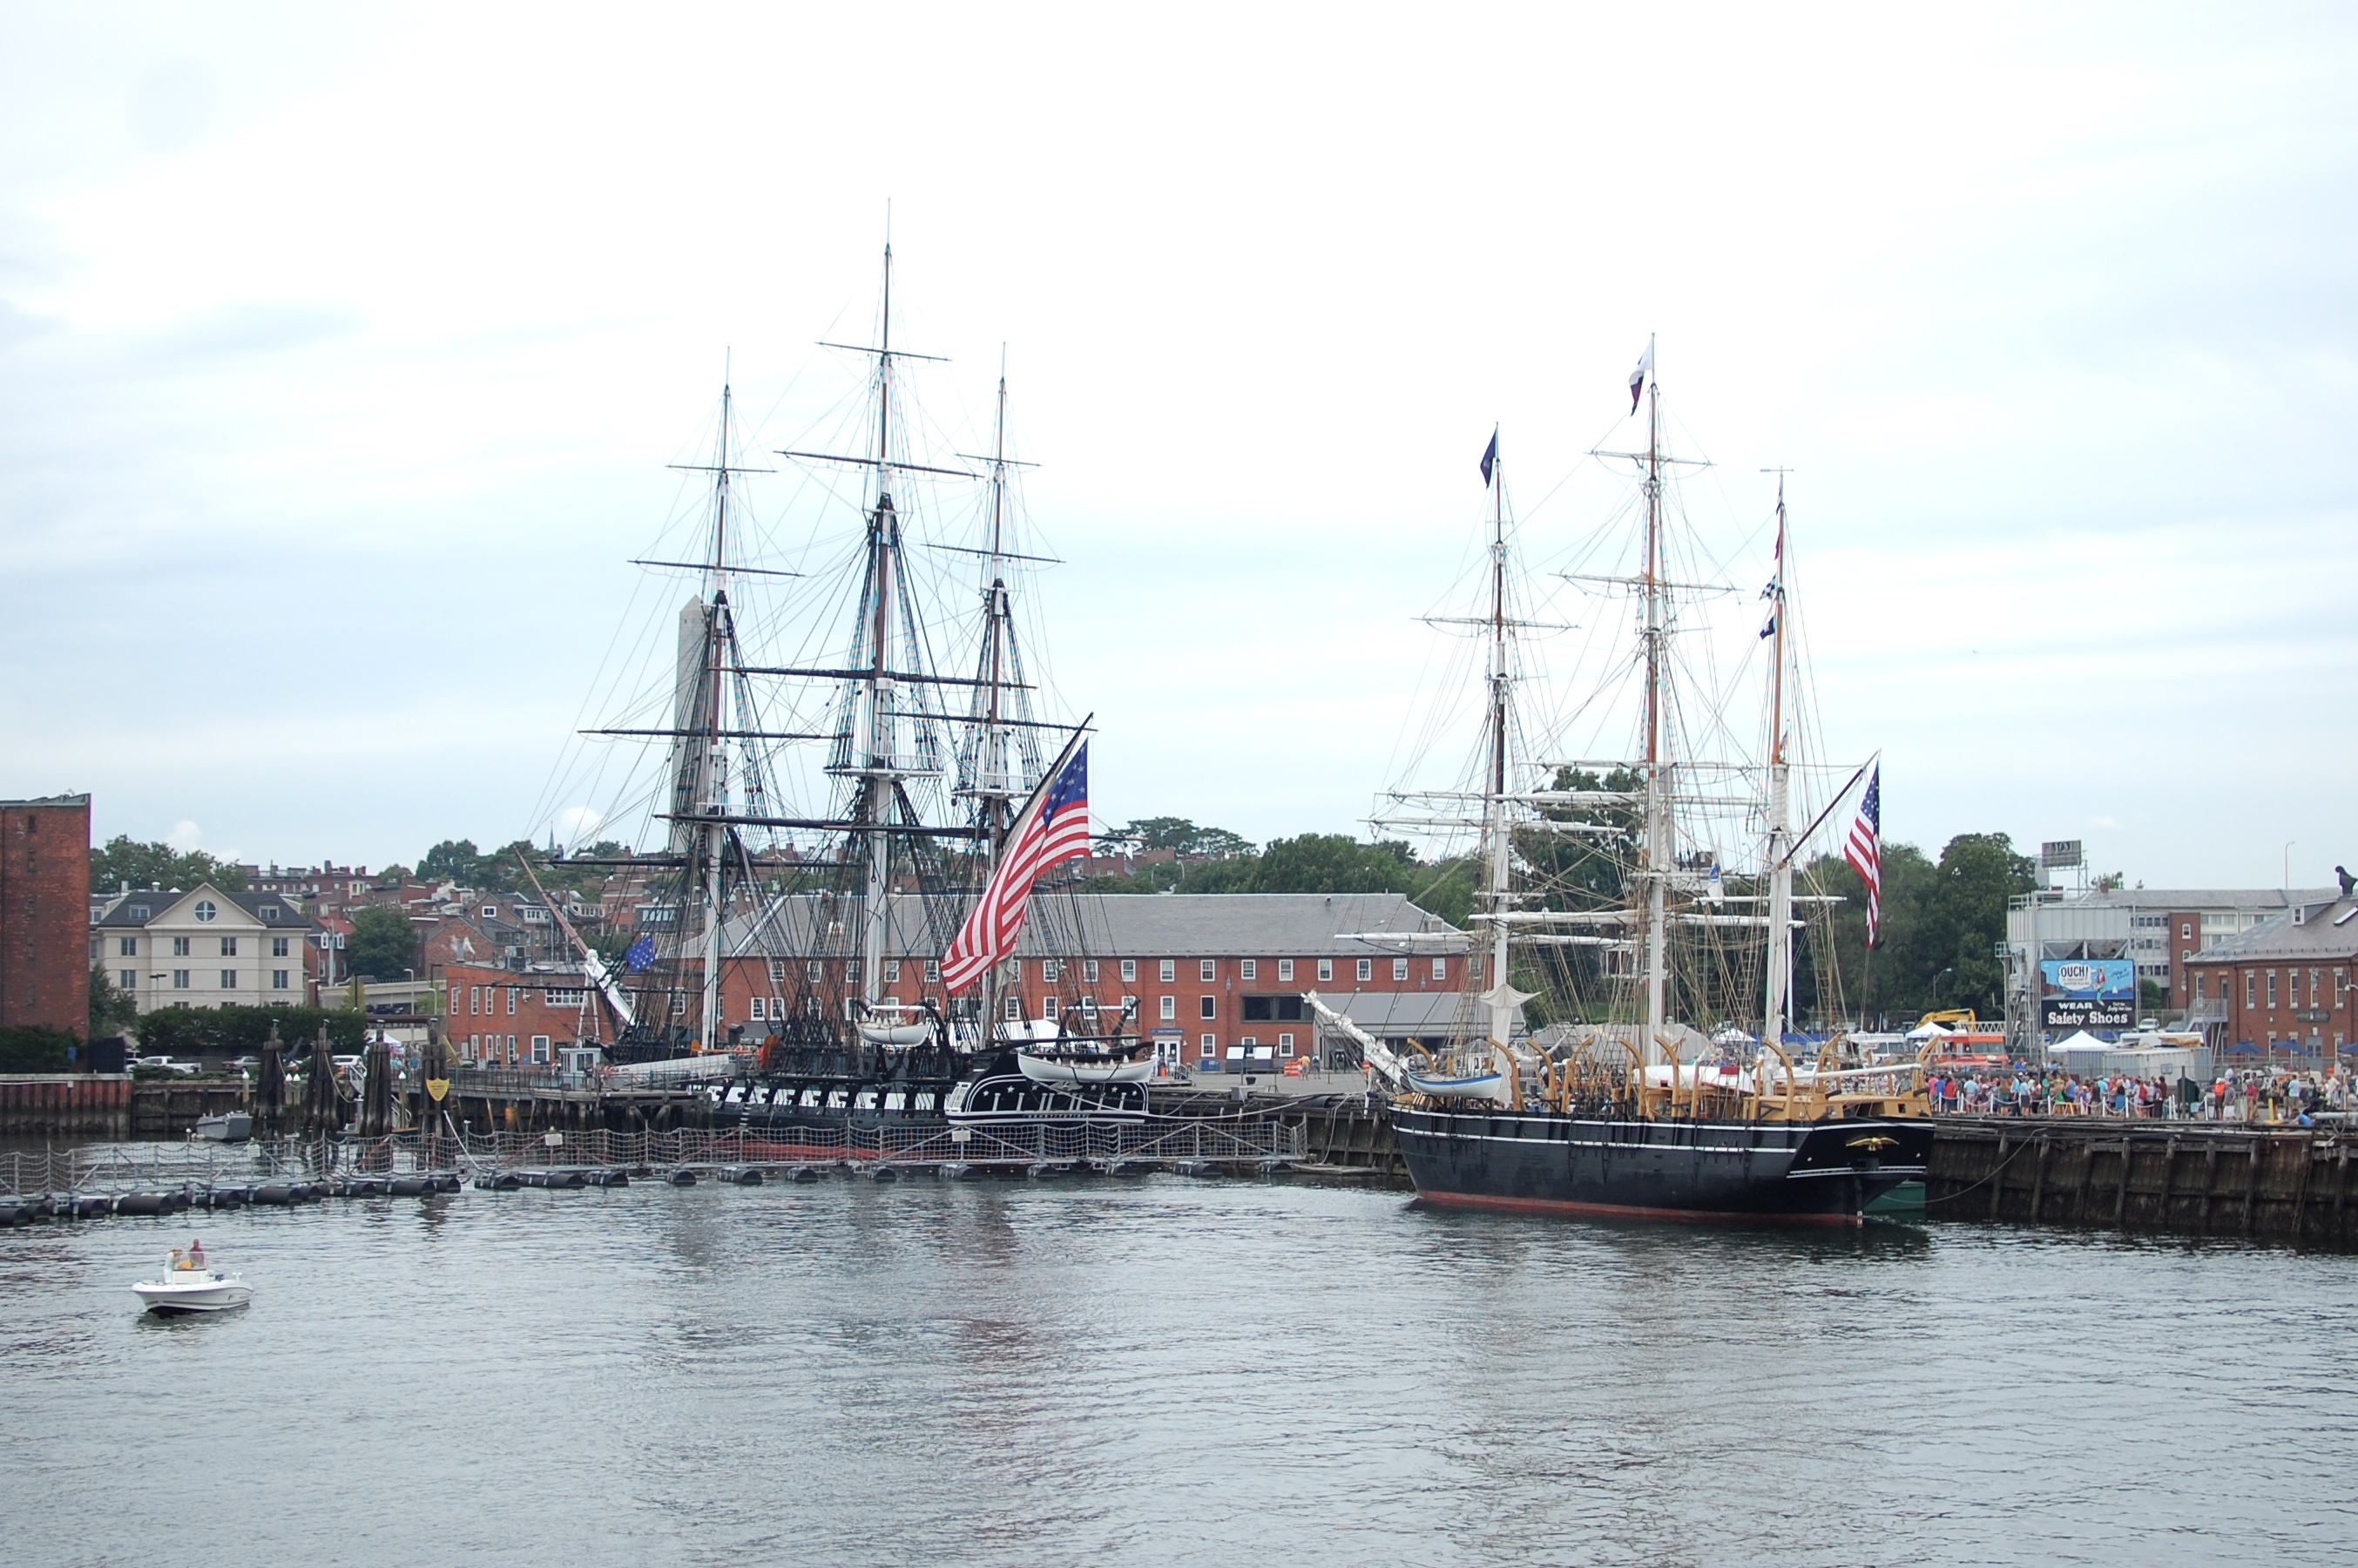 The Constitution; Whaling Ship Tours